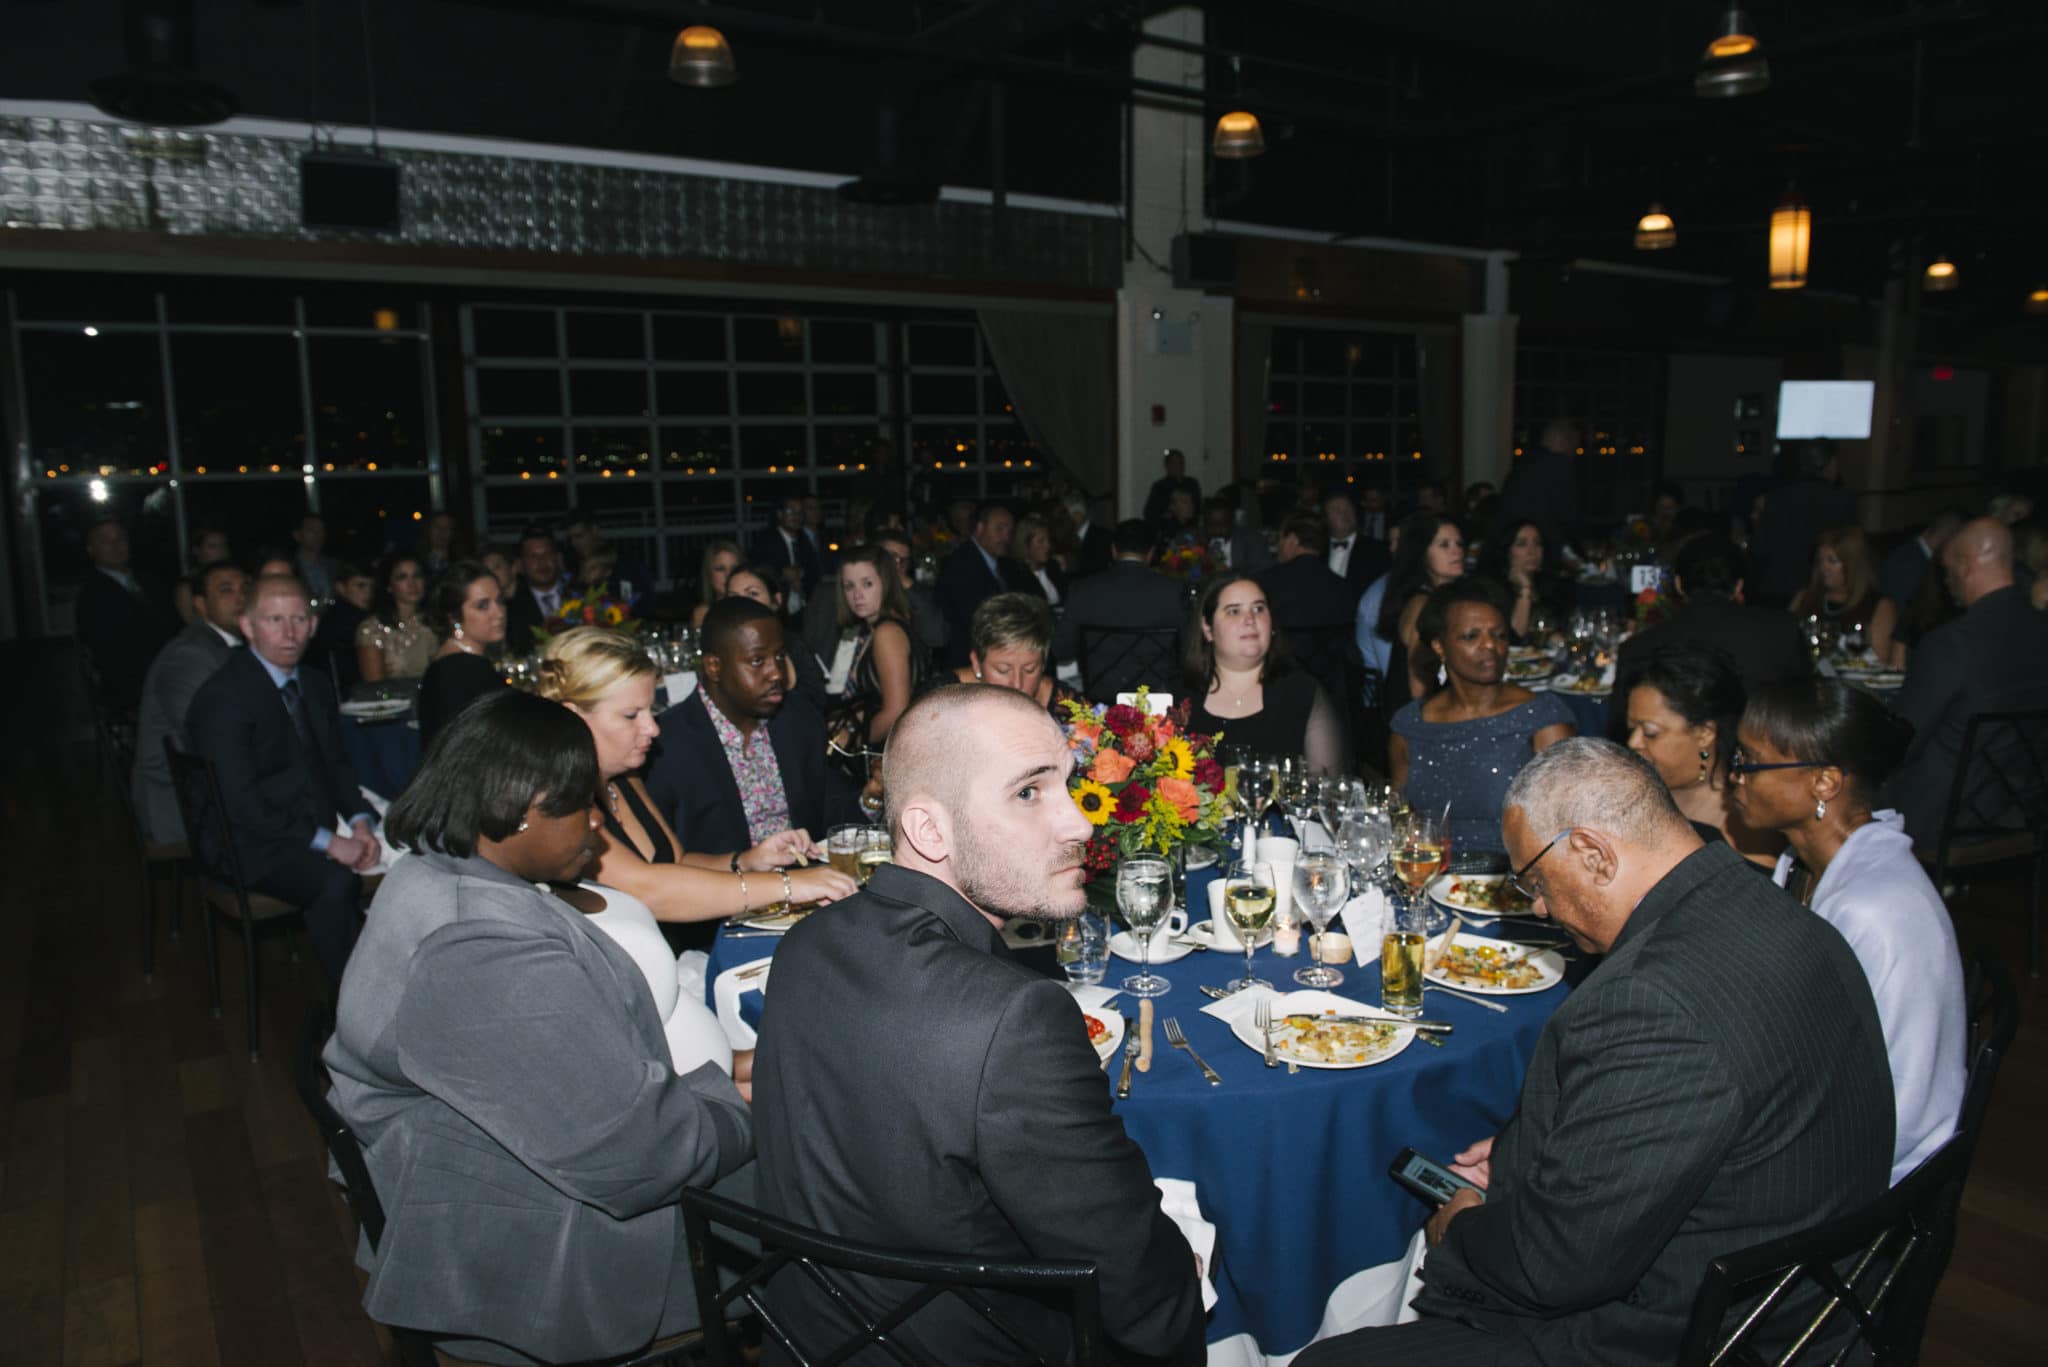 A Celebration of Community Options’ 20 years of service in New York City. Gala held Thursday, October 6, 2016 at The Lighthouse at Chelsea Piers in New York, NY.